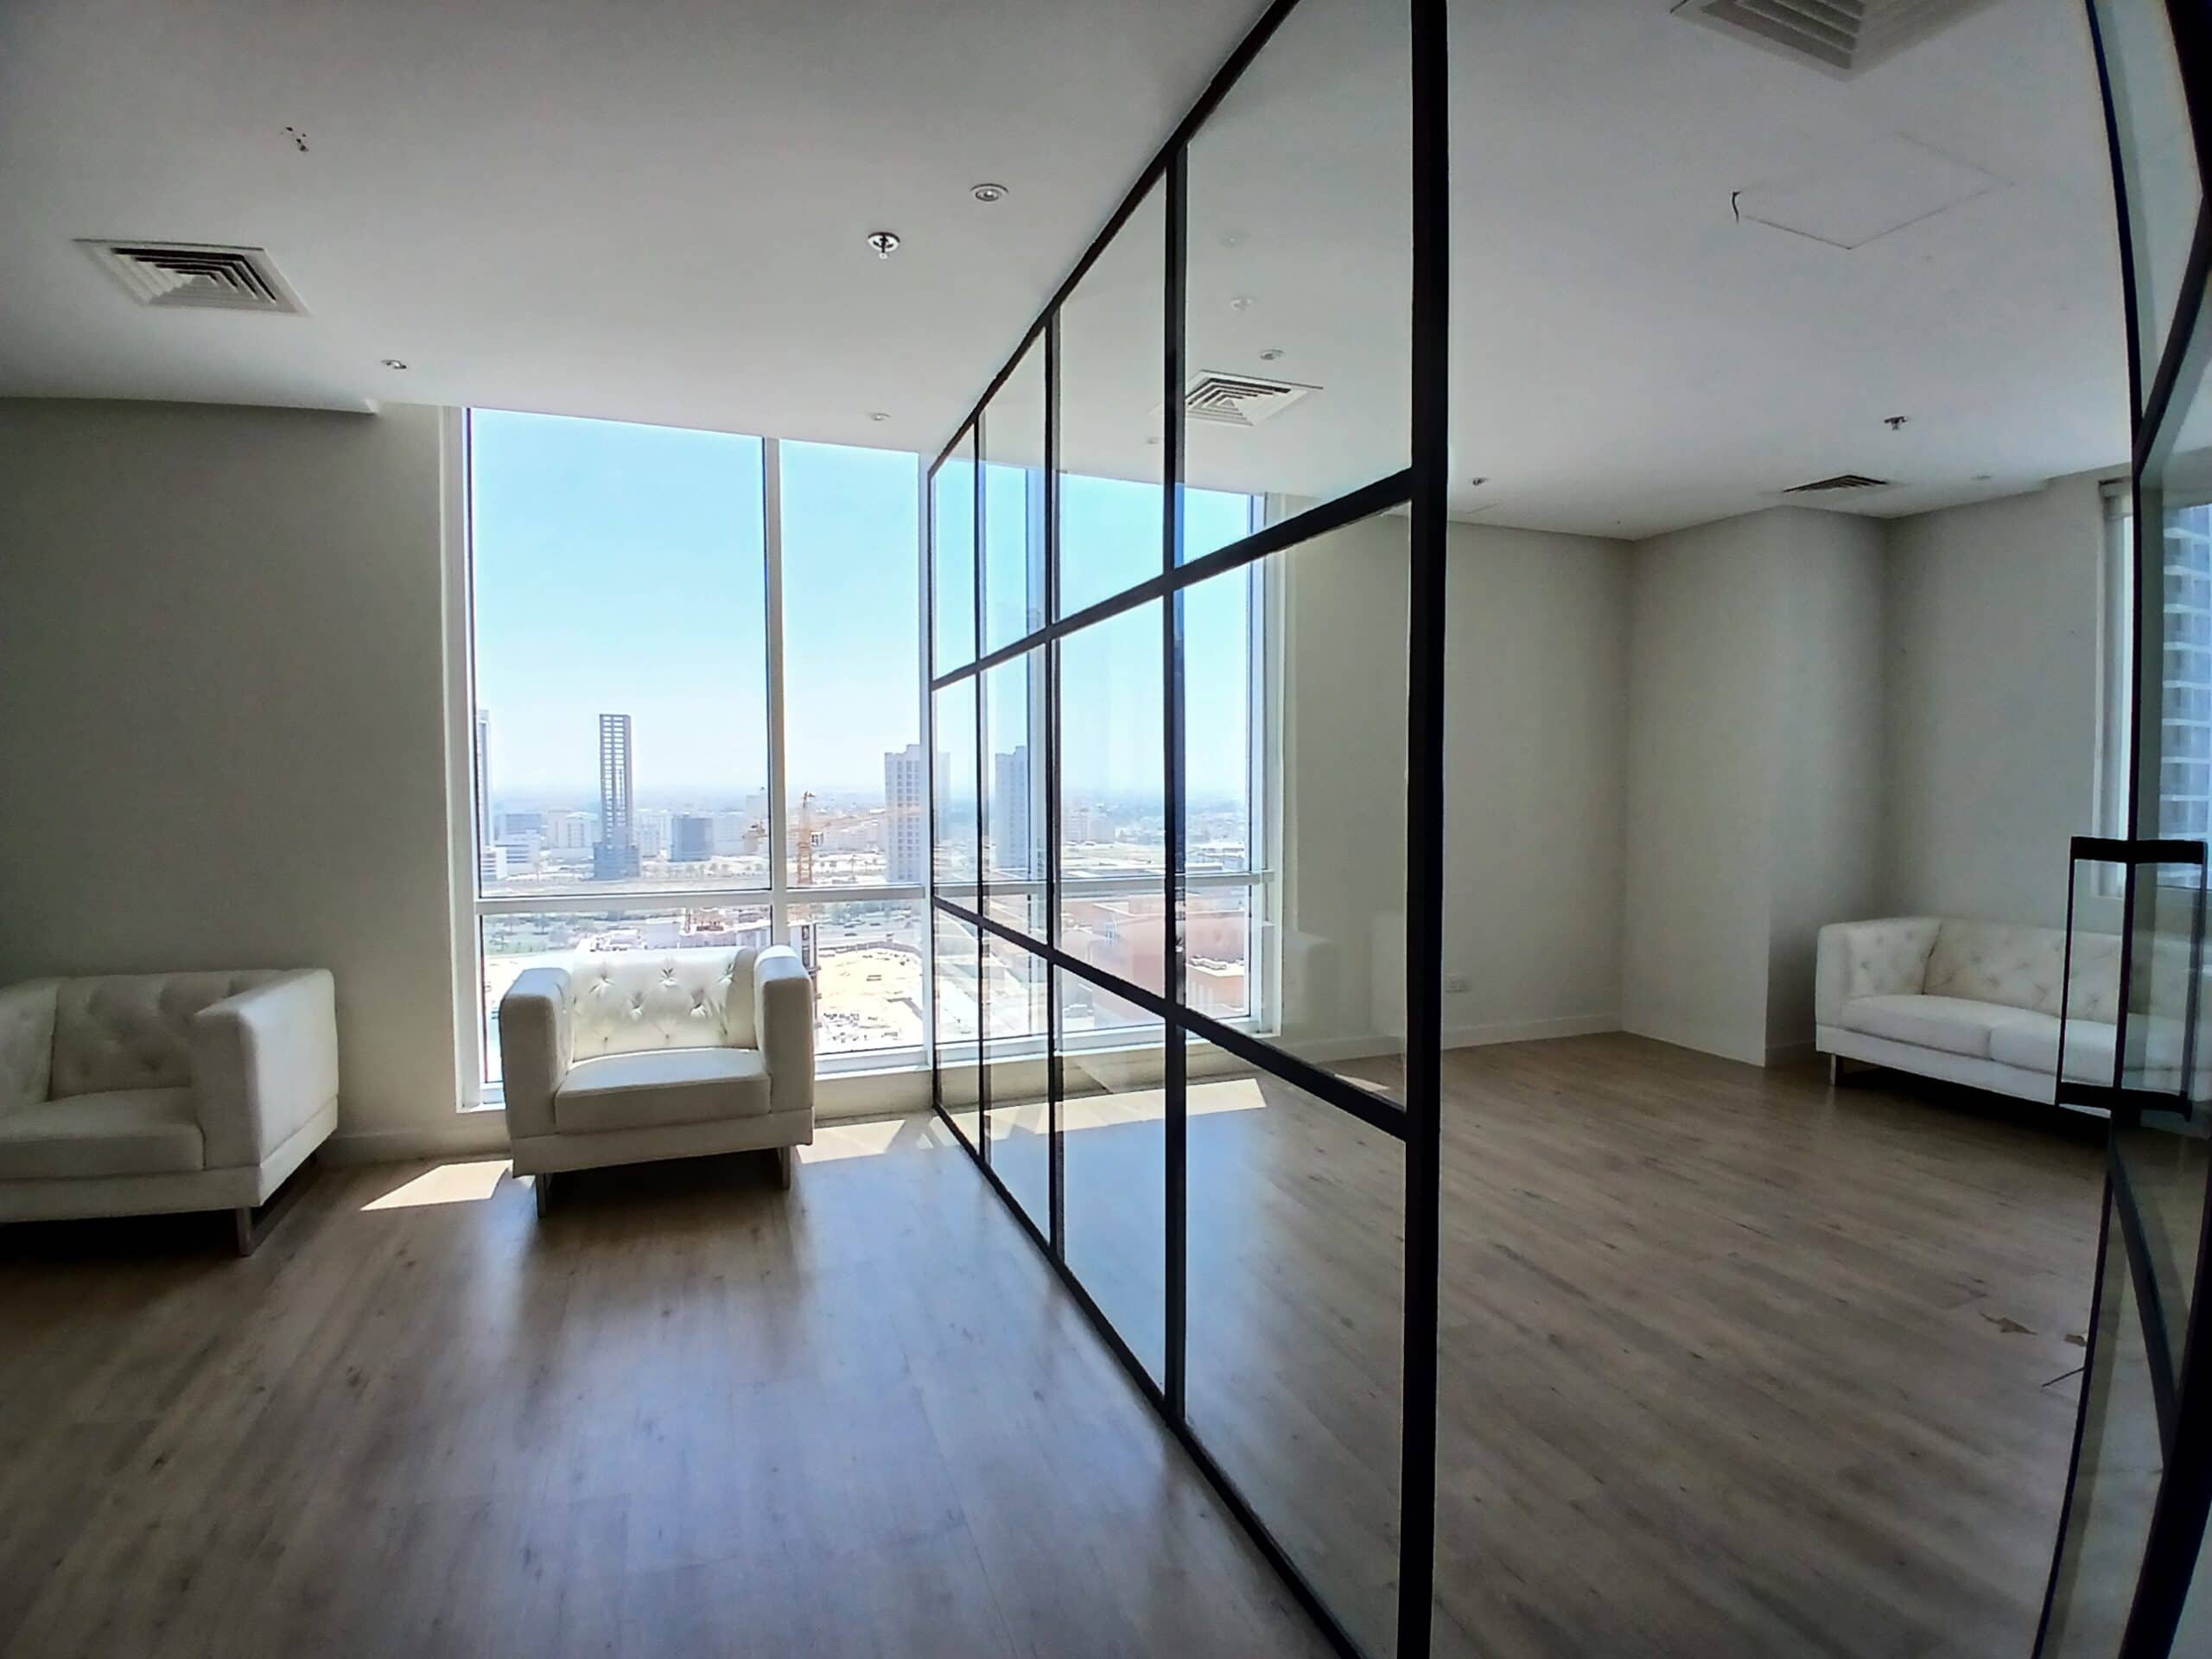 Modern apartment living room with reflective glass partition, two white sofas, and large windows overlooking a cityscape, enhanced for SEO.